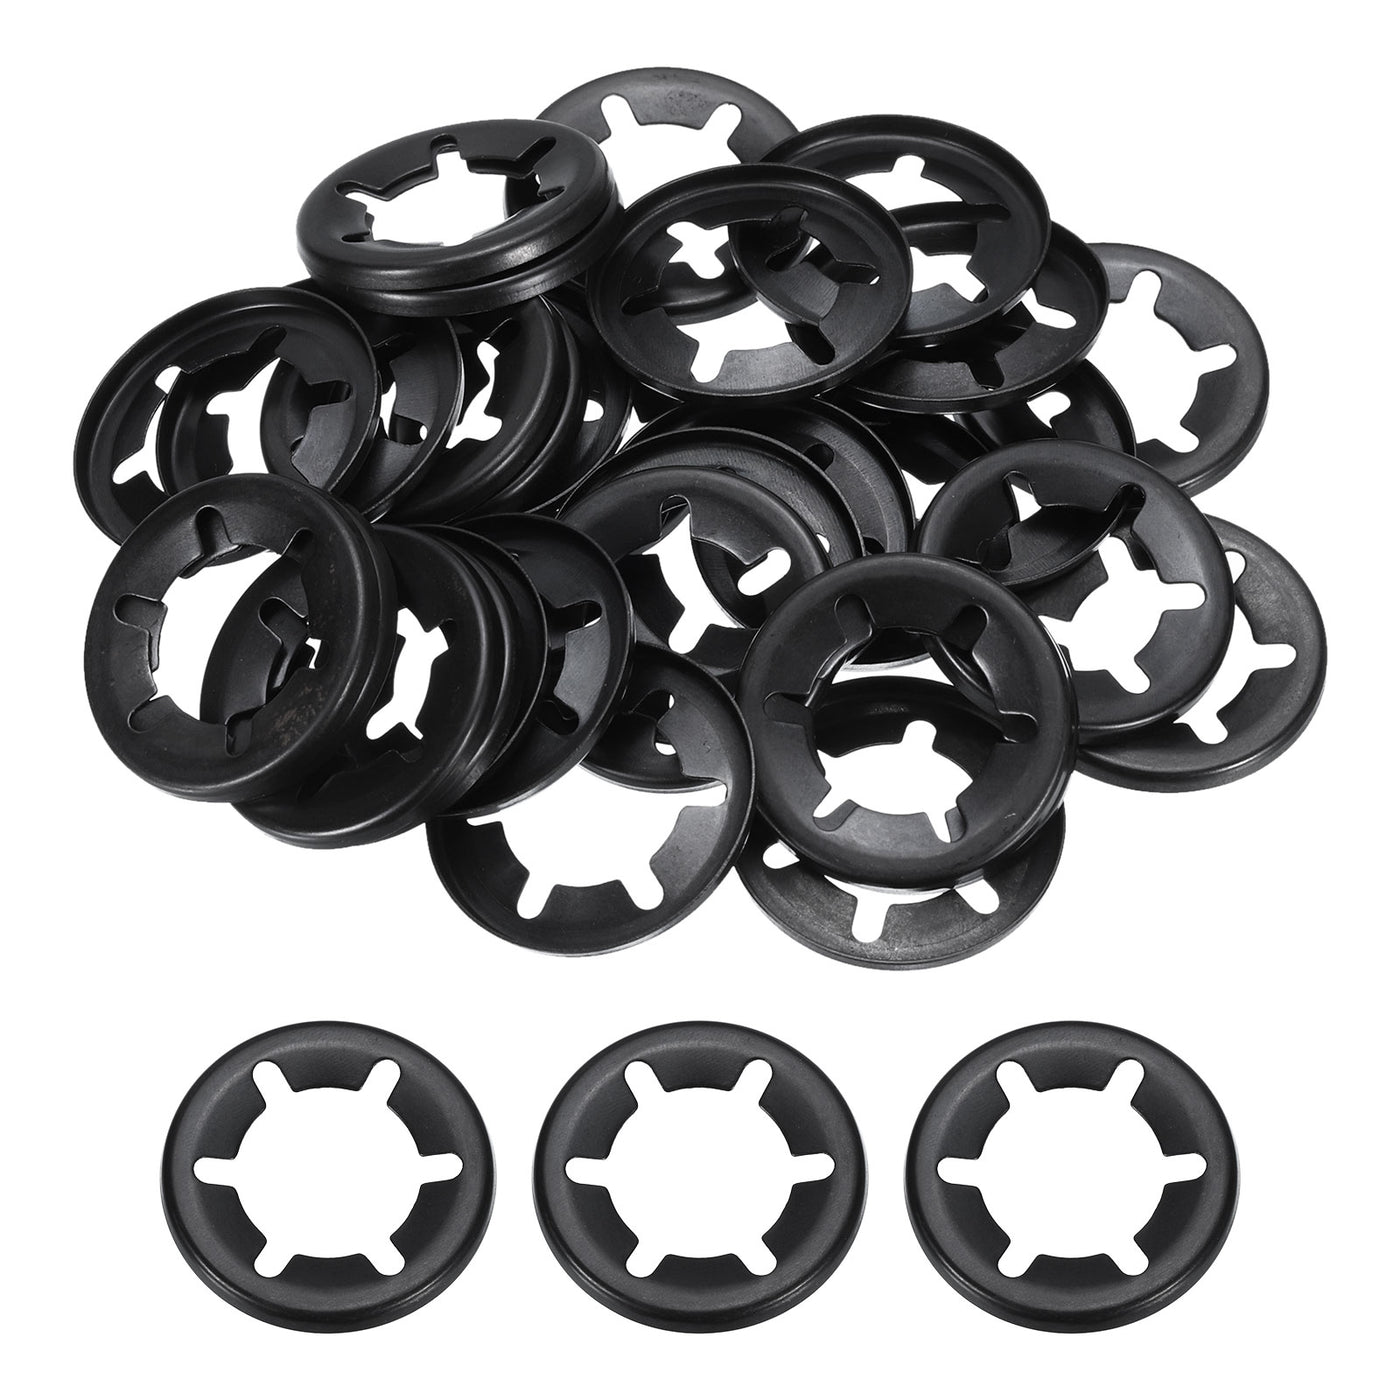 uxcell Uxcell 30pcs Internal Tooth Star Lock Washers M16 Quick Locking Washers, 65Mn Steel